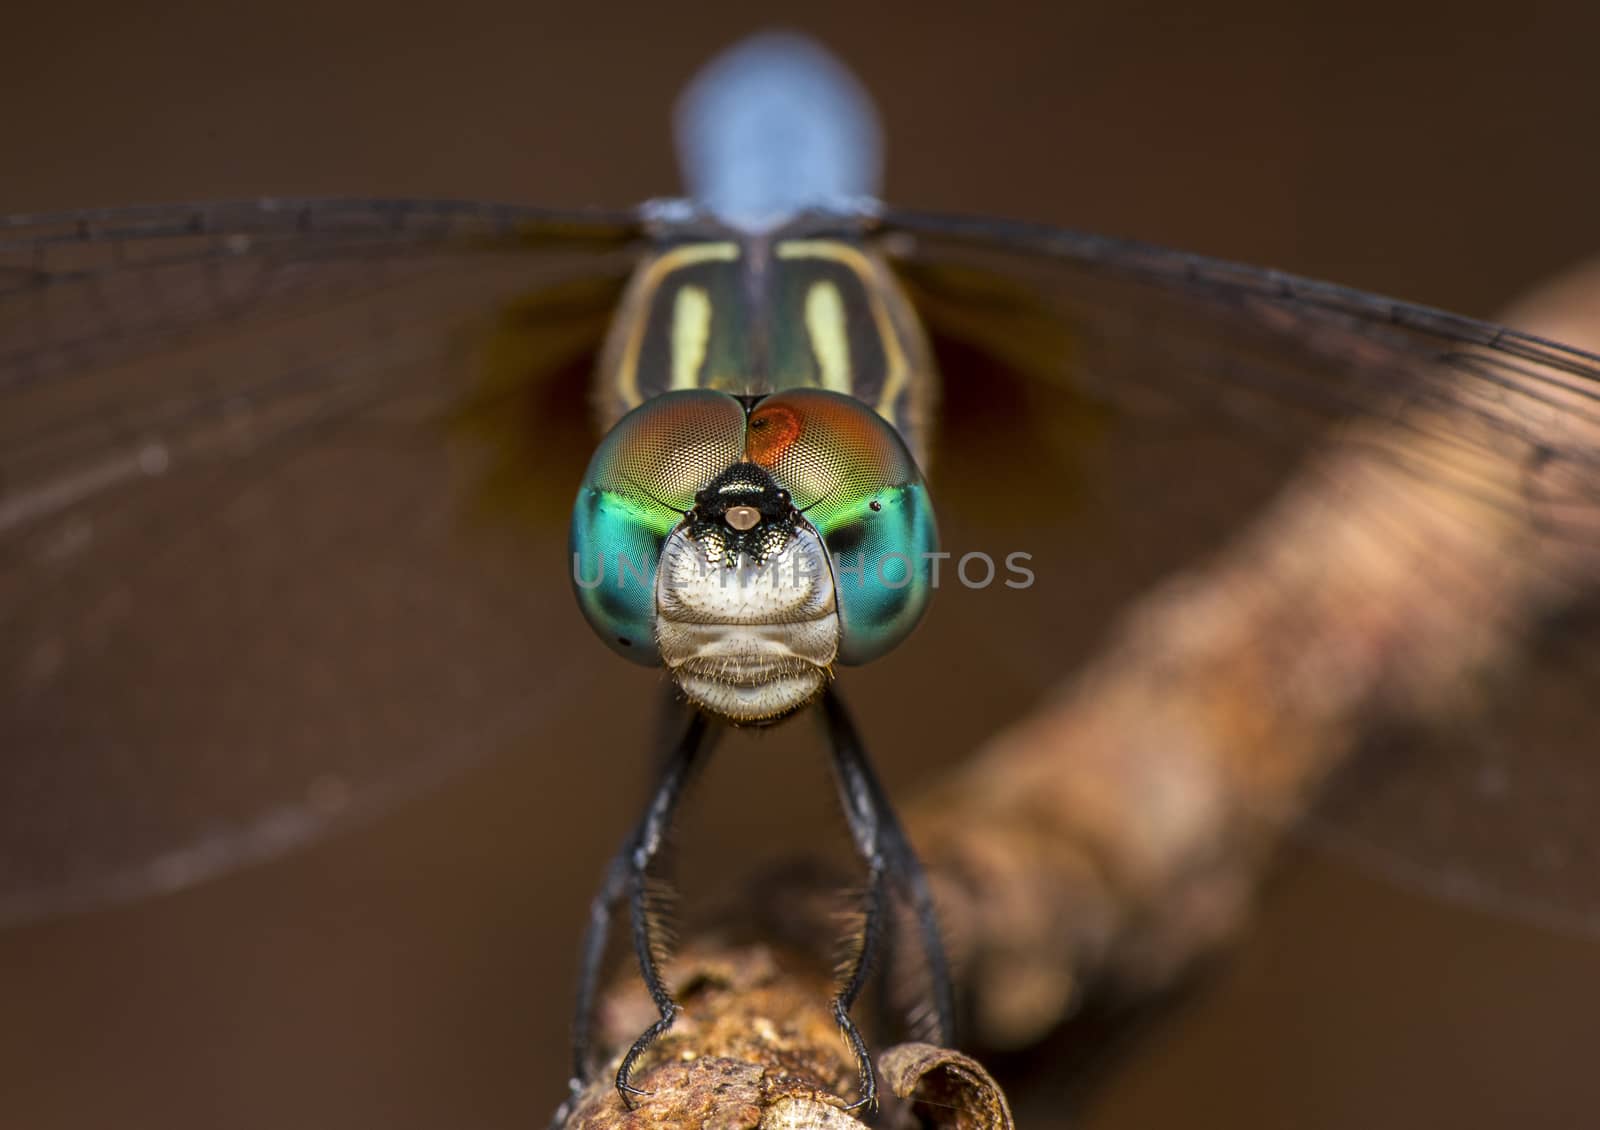 compound eyes of a dragon fly in close